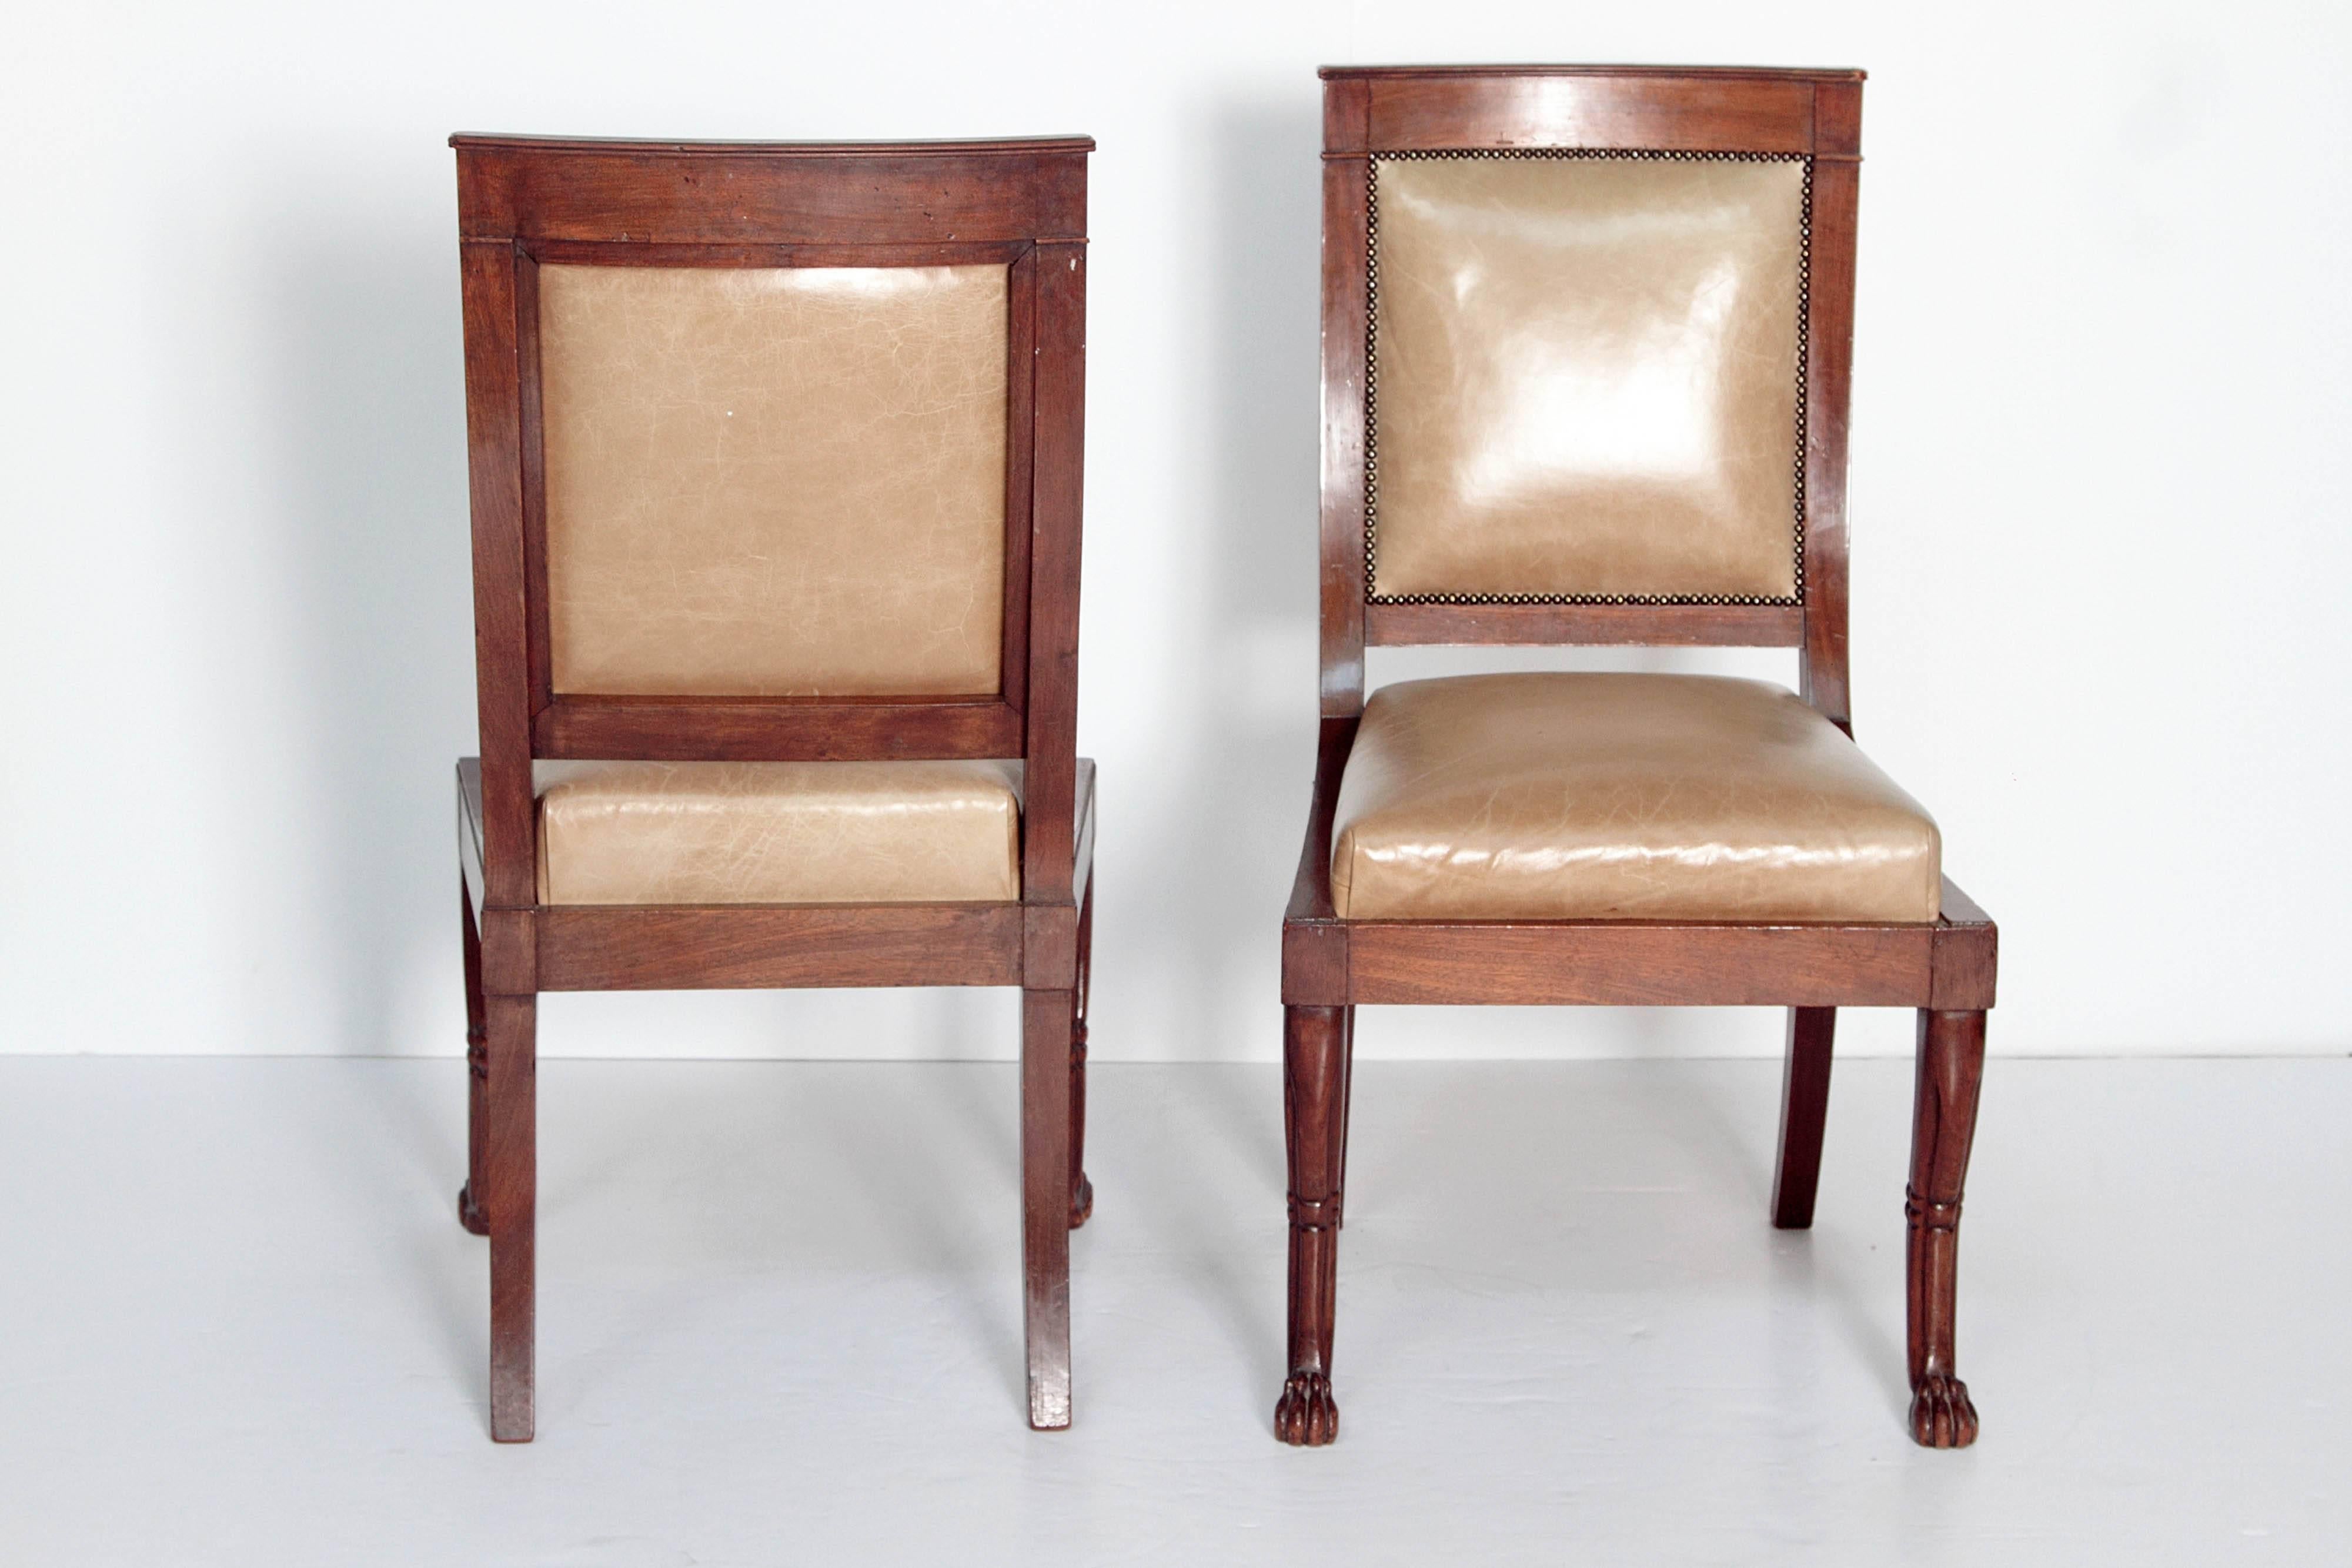 19th Century Pair of French Neoclassic Period Chairs